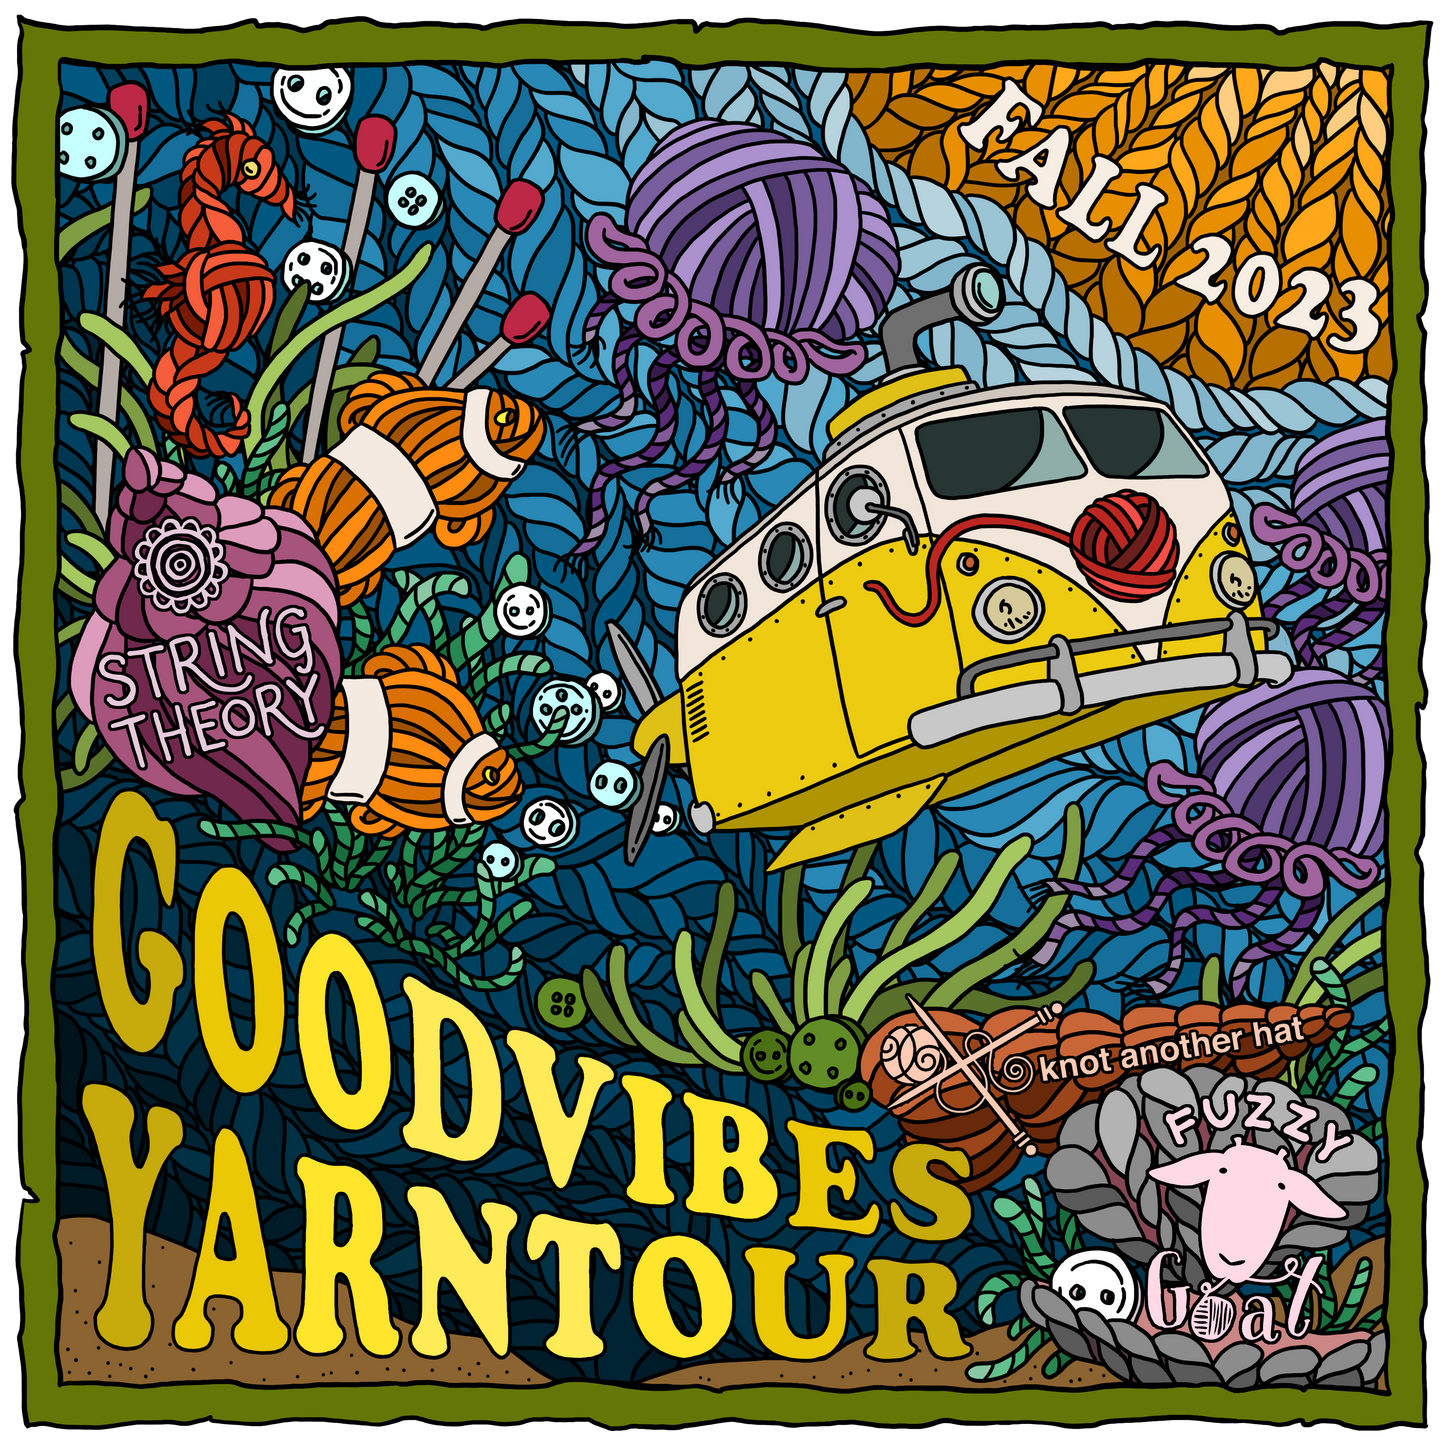 Good Vibes Yarn Tour: Under the Sea Ticket